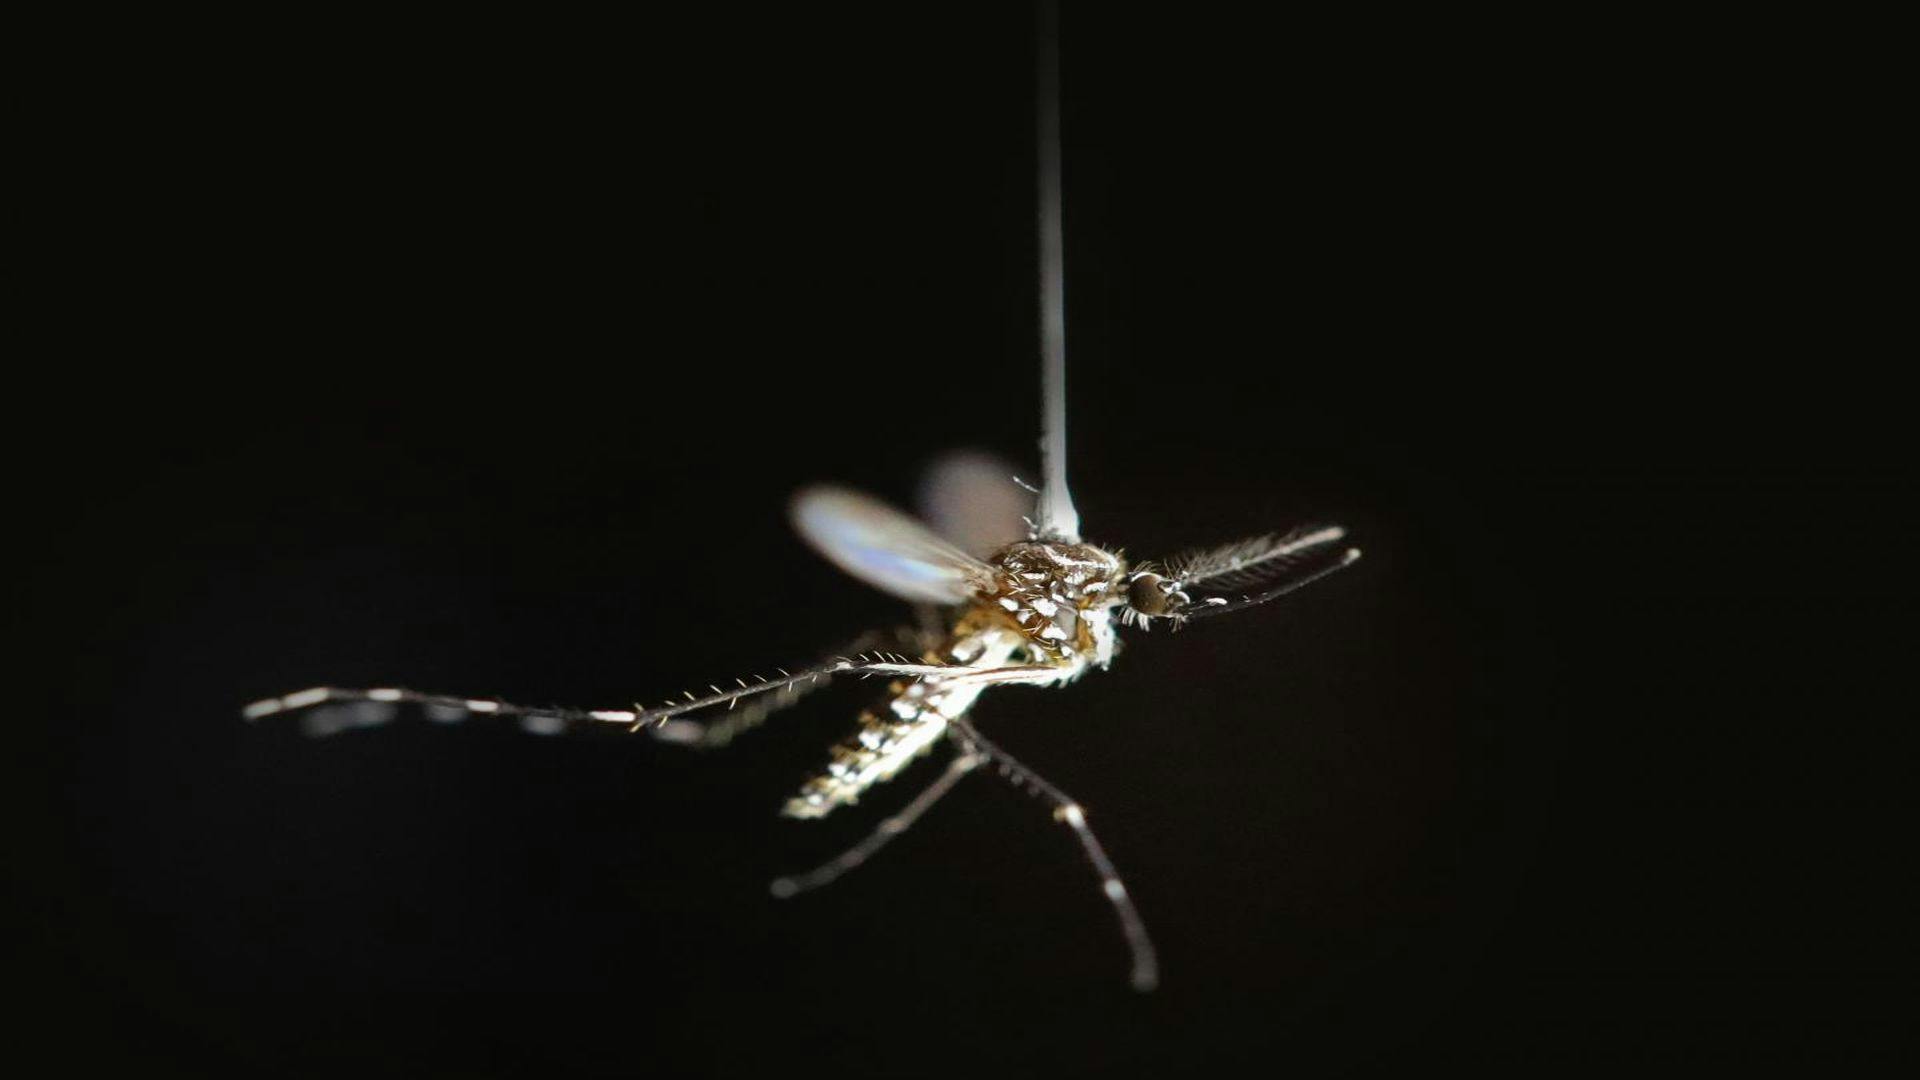 If You Swat Mosquitoes, They May Learn to Avoid Your Scent